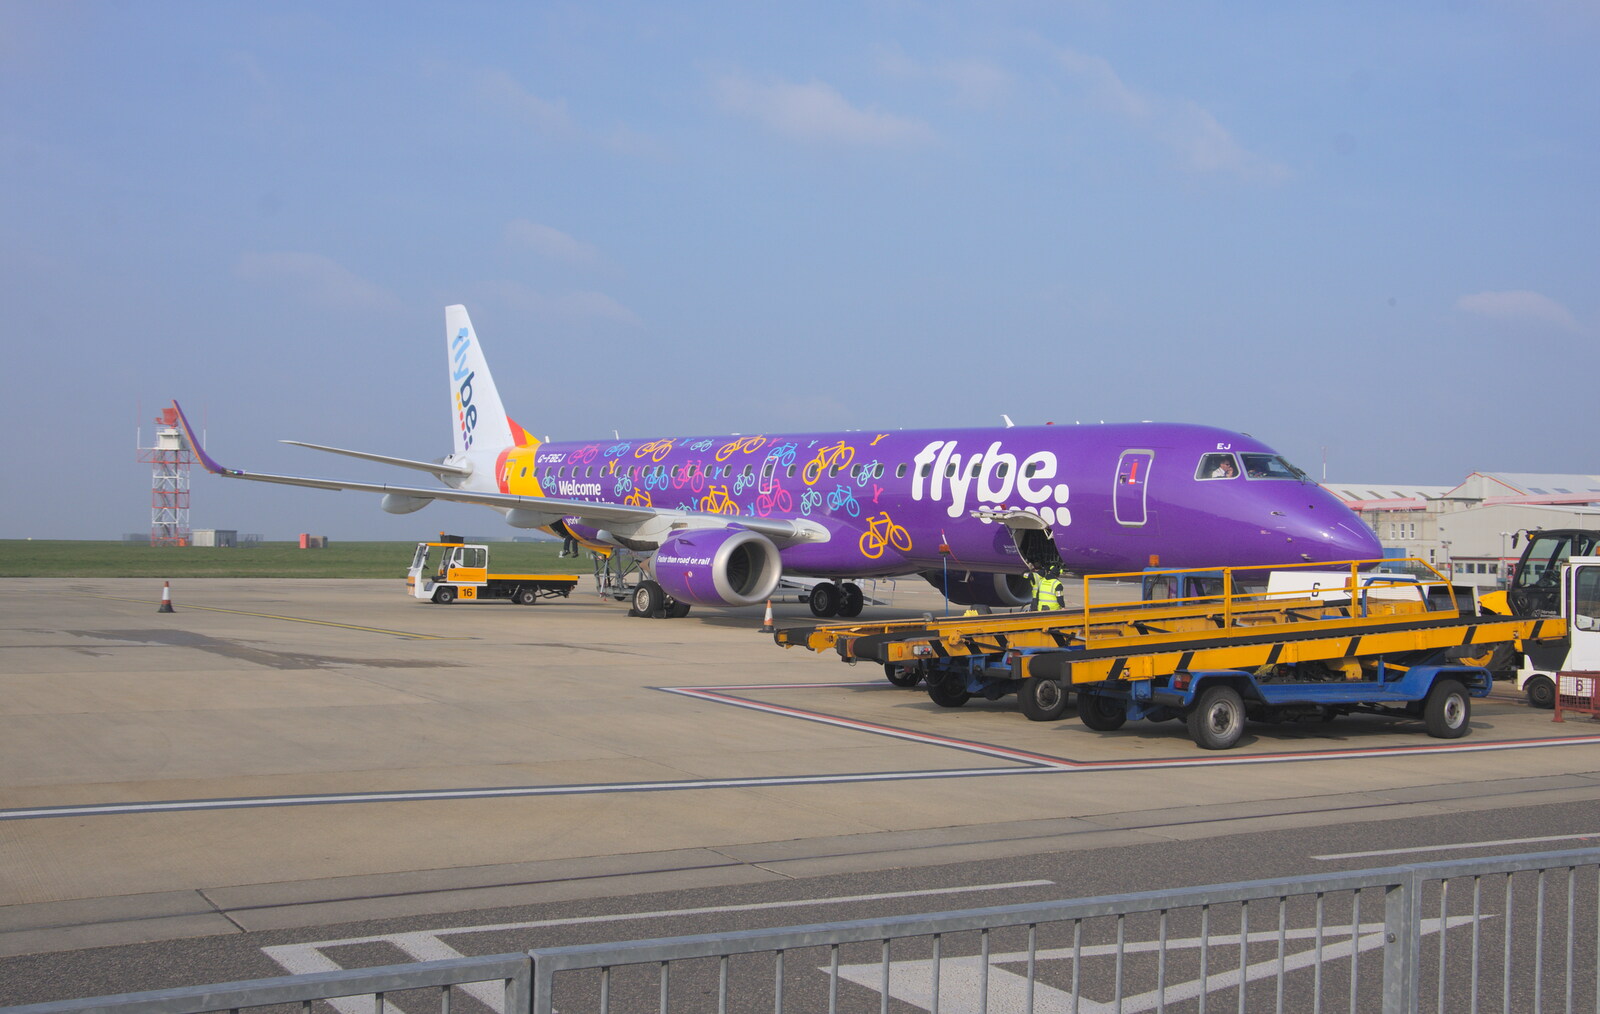 Our purple FlyBe Embraer plane awaits from A Holiday in Nerja, Andalusia, Spain - 15th April 2019